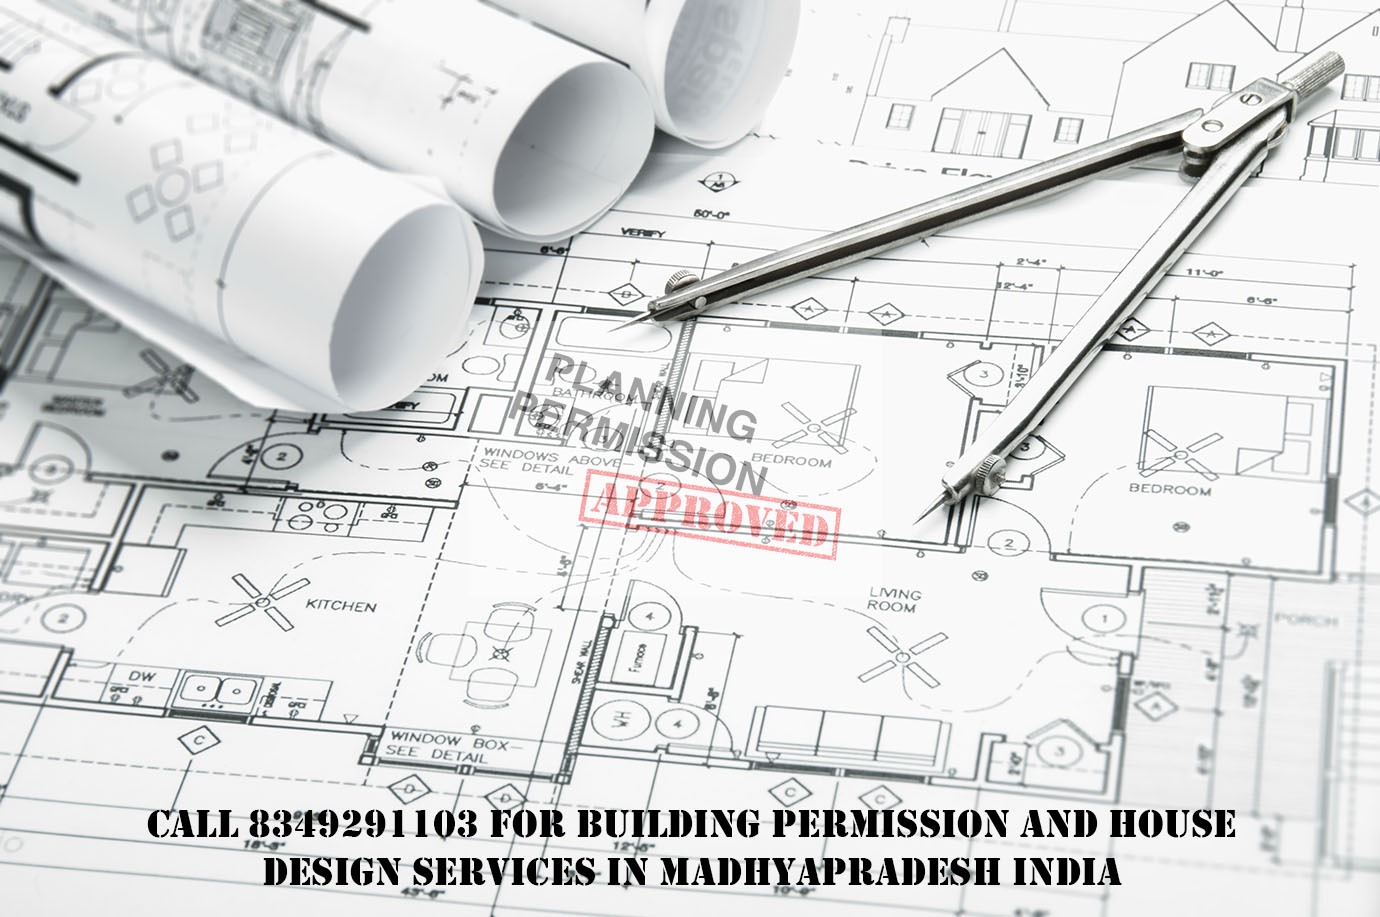 How to Get Online Building Permission in Bhopal for House and Duplex